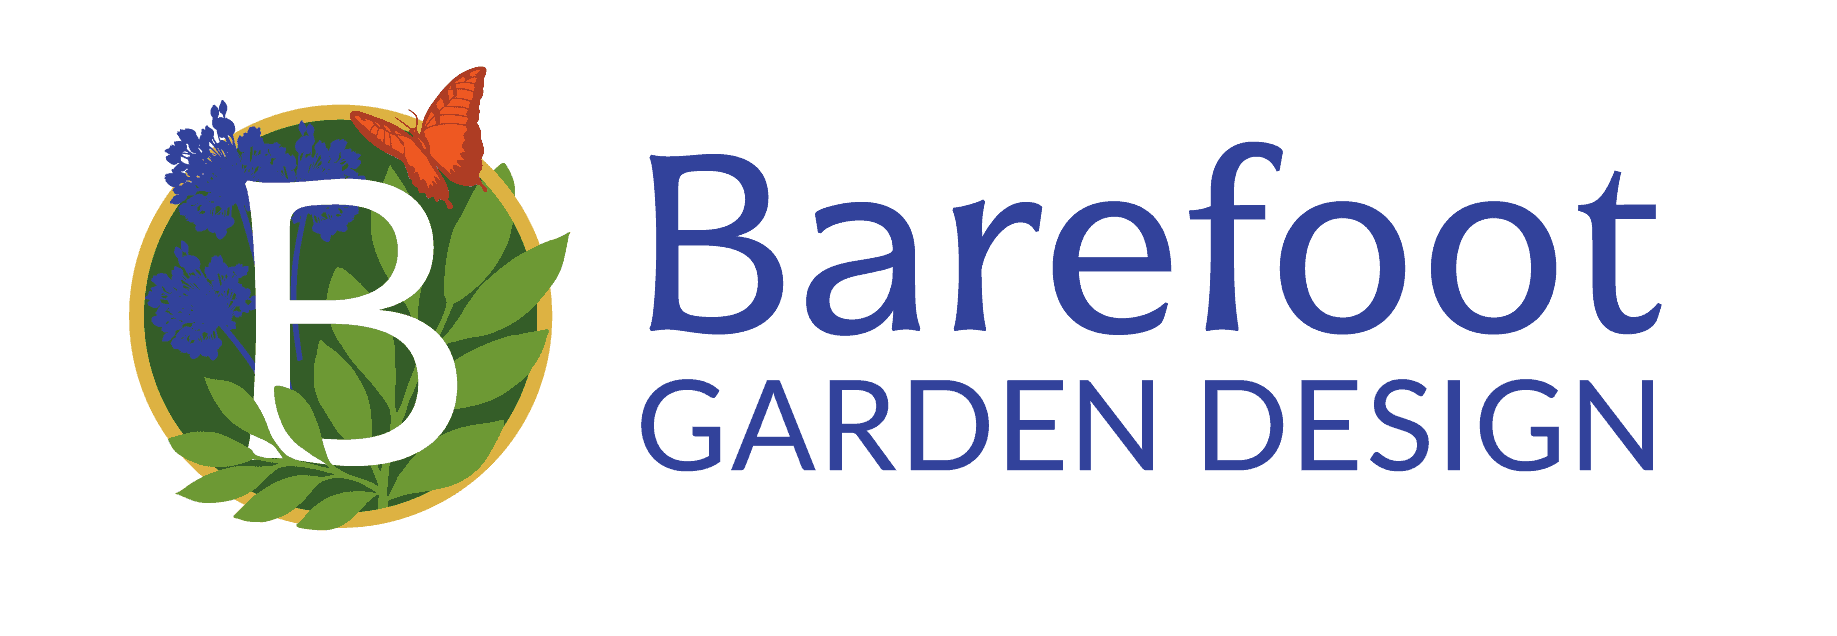 Barefoot Garden Design Logo - Letter B Surrounded by green leaves, blue flowers, and orange butterfly keywords: eco friendly landscape design contact for a free estimate